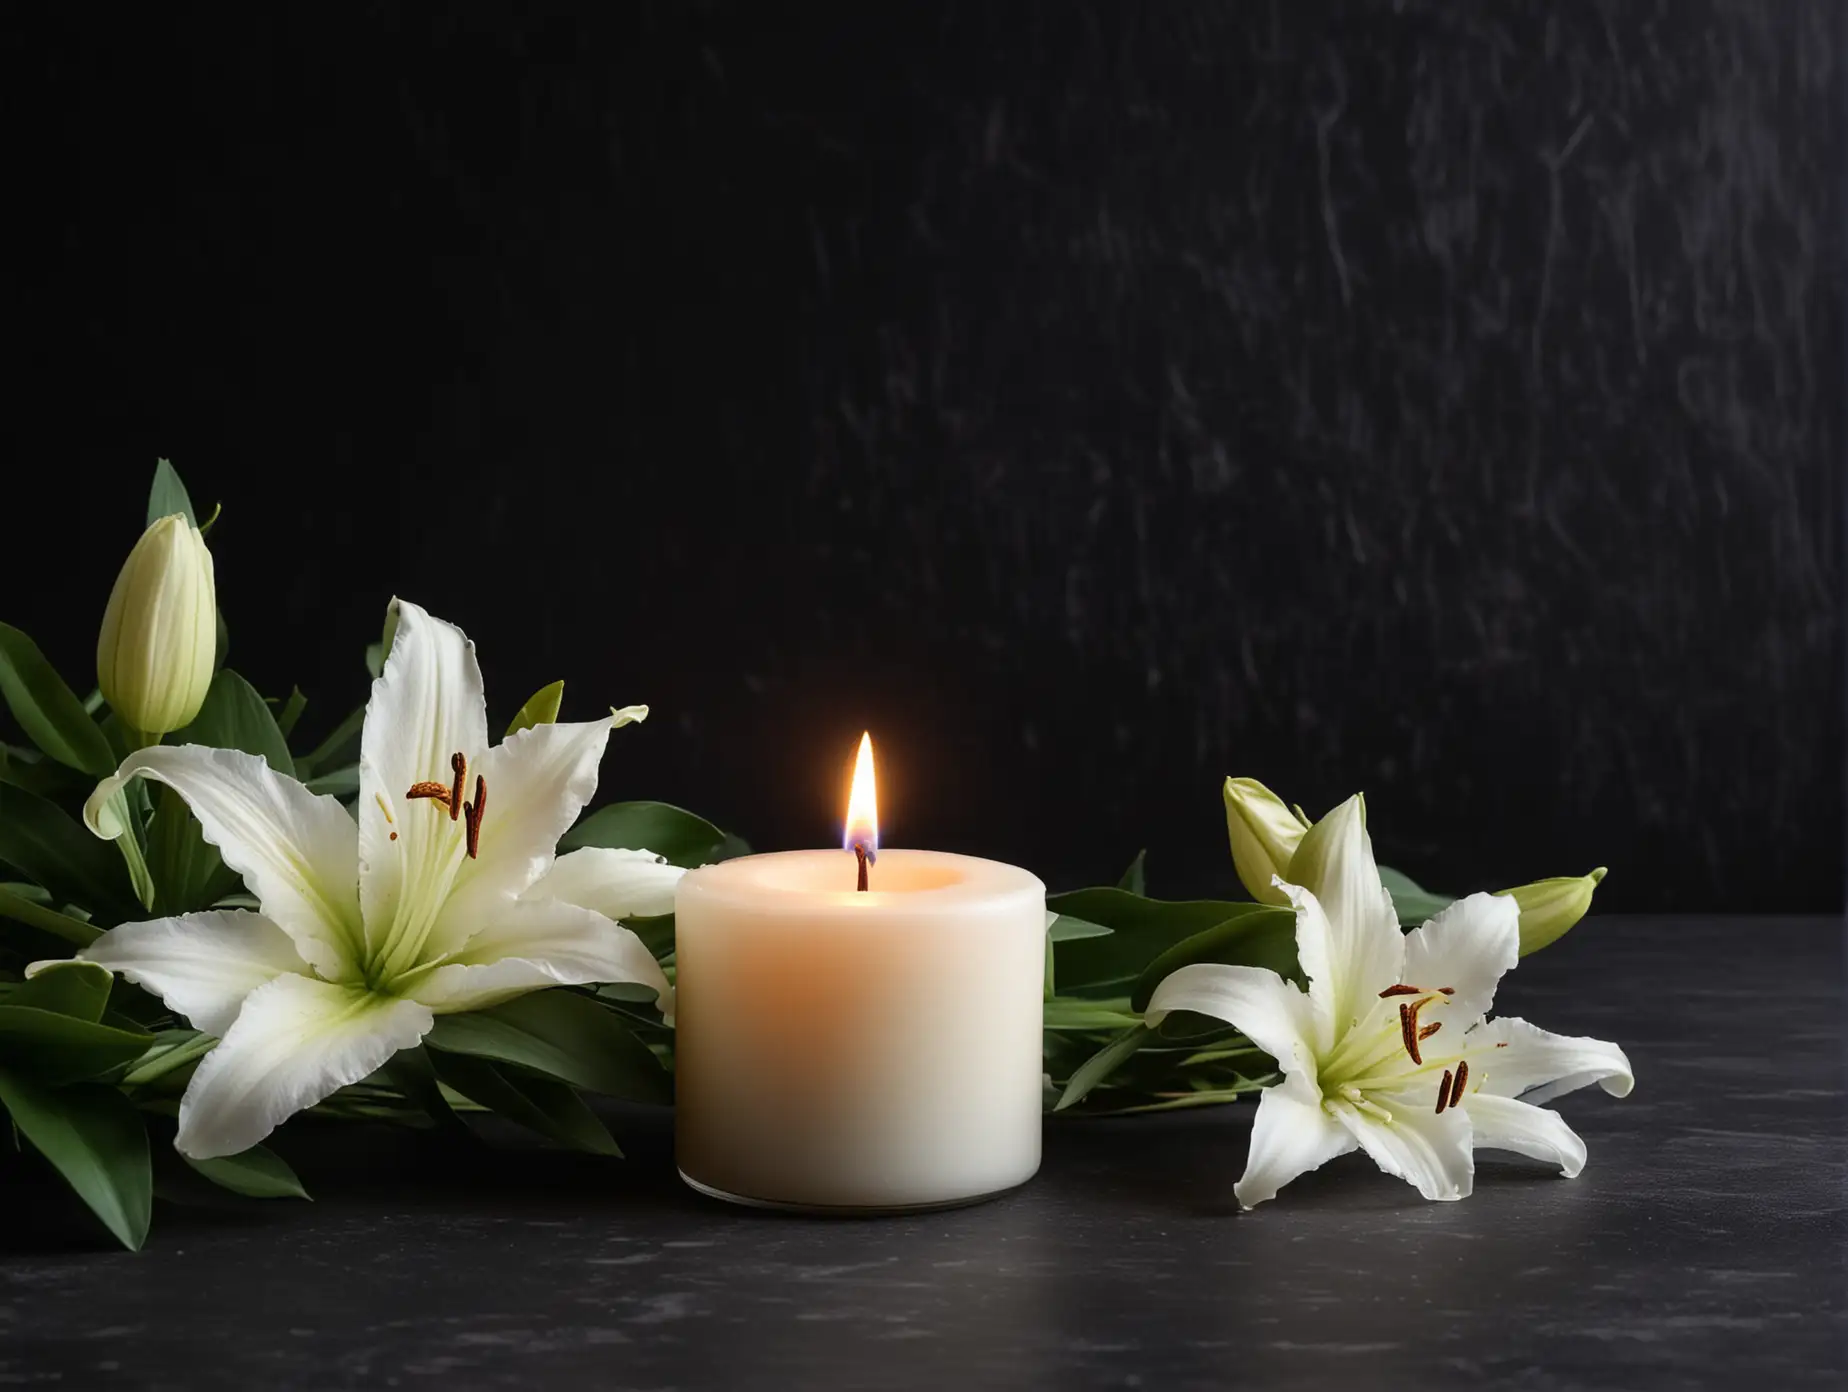 Tranquil Scene Illuminated Lily Candle in Dark Surroundings